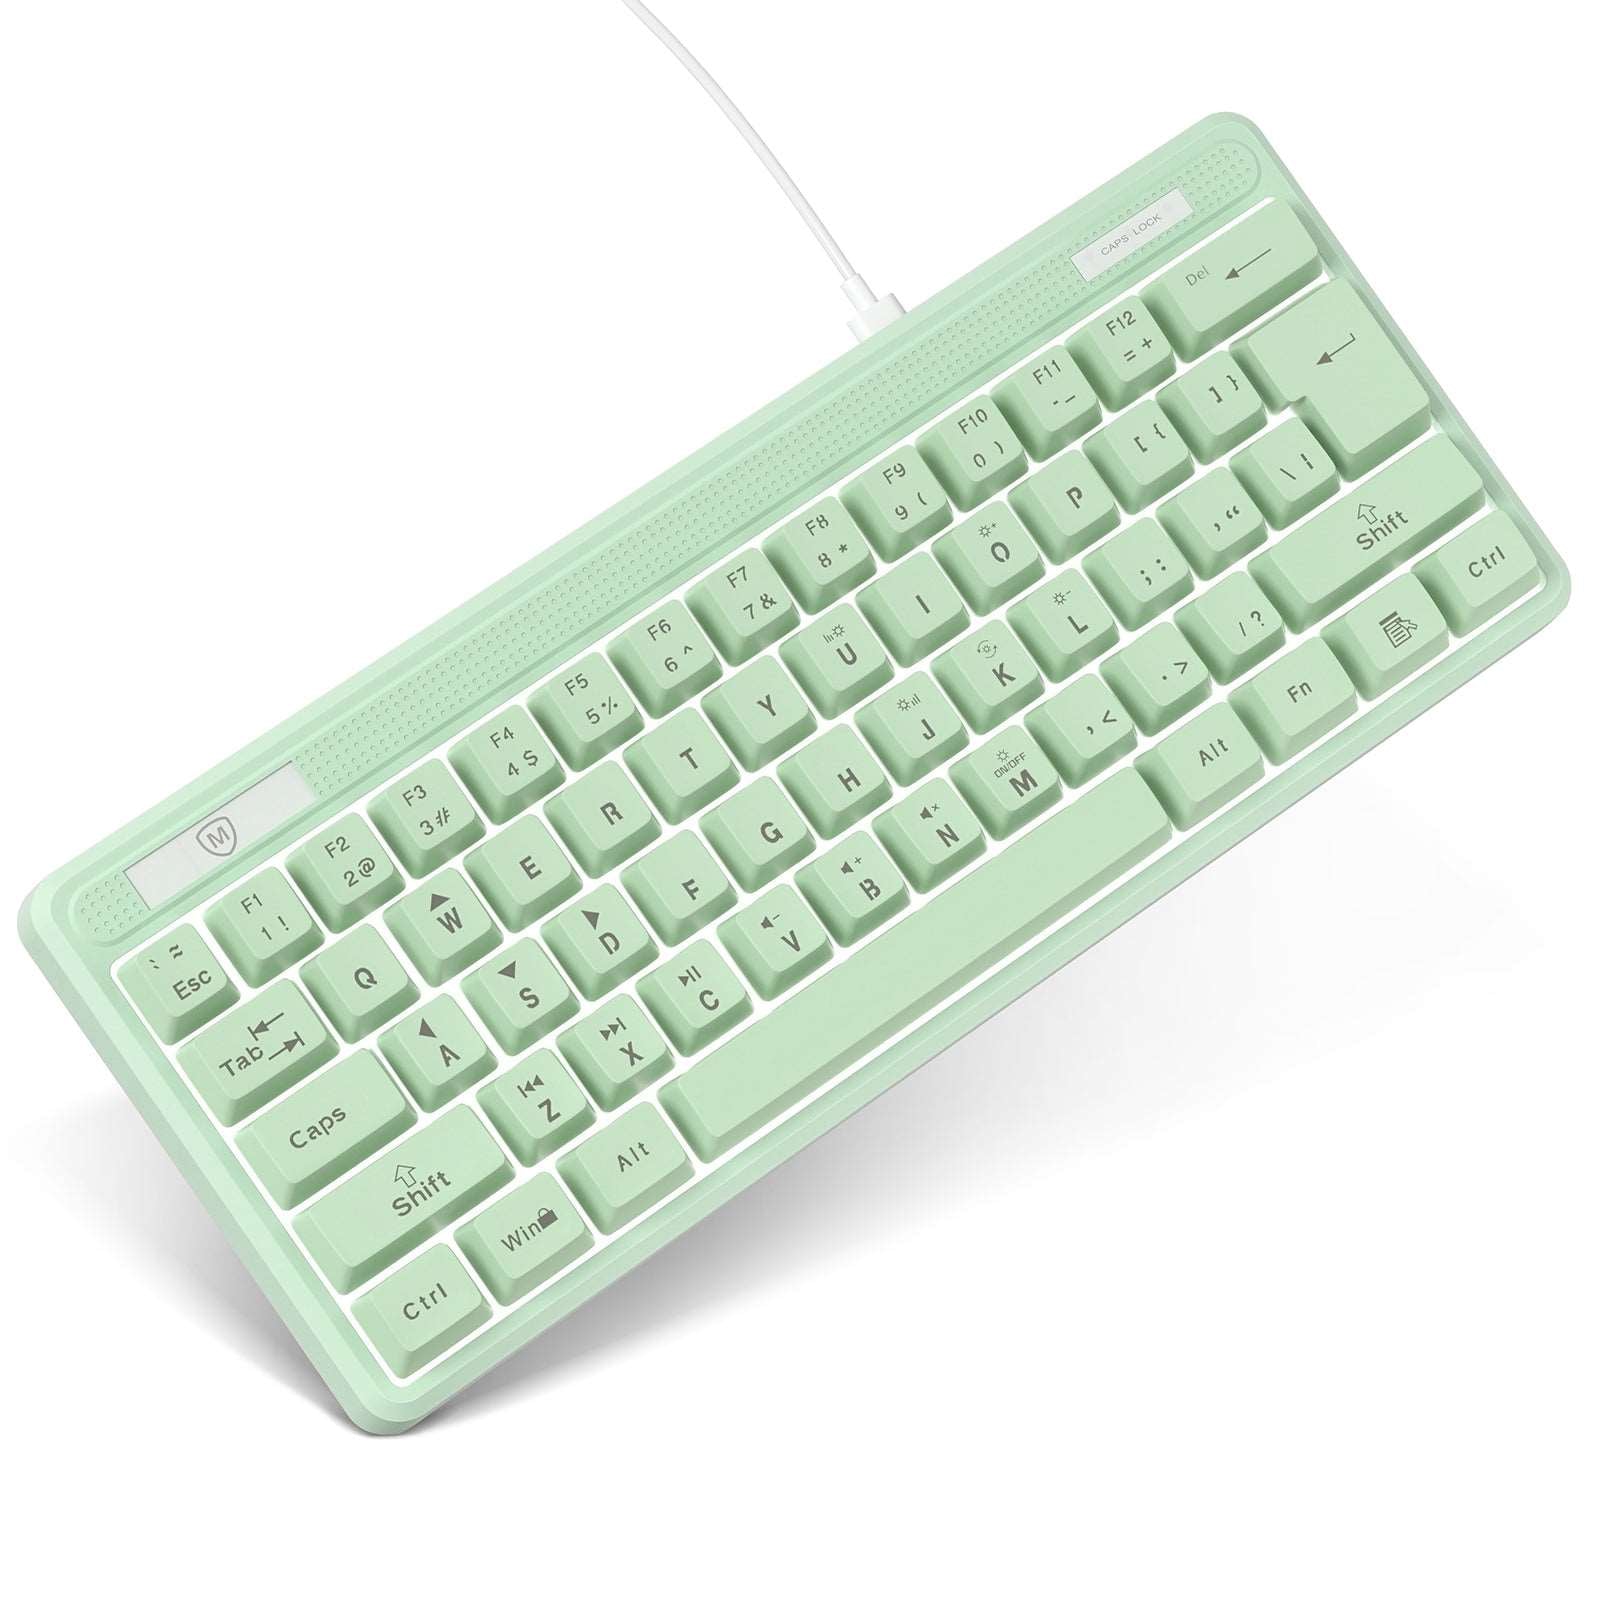 Mini Backlit Wired Keyboard for Computer AK-100 green